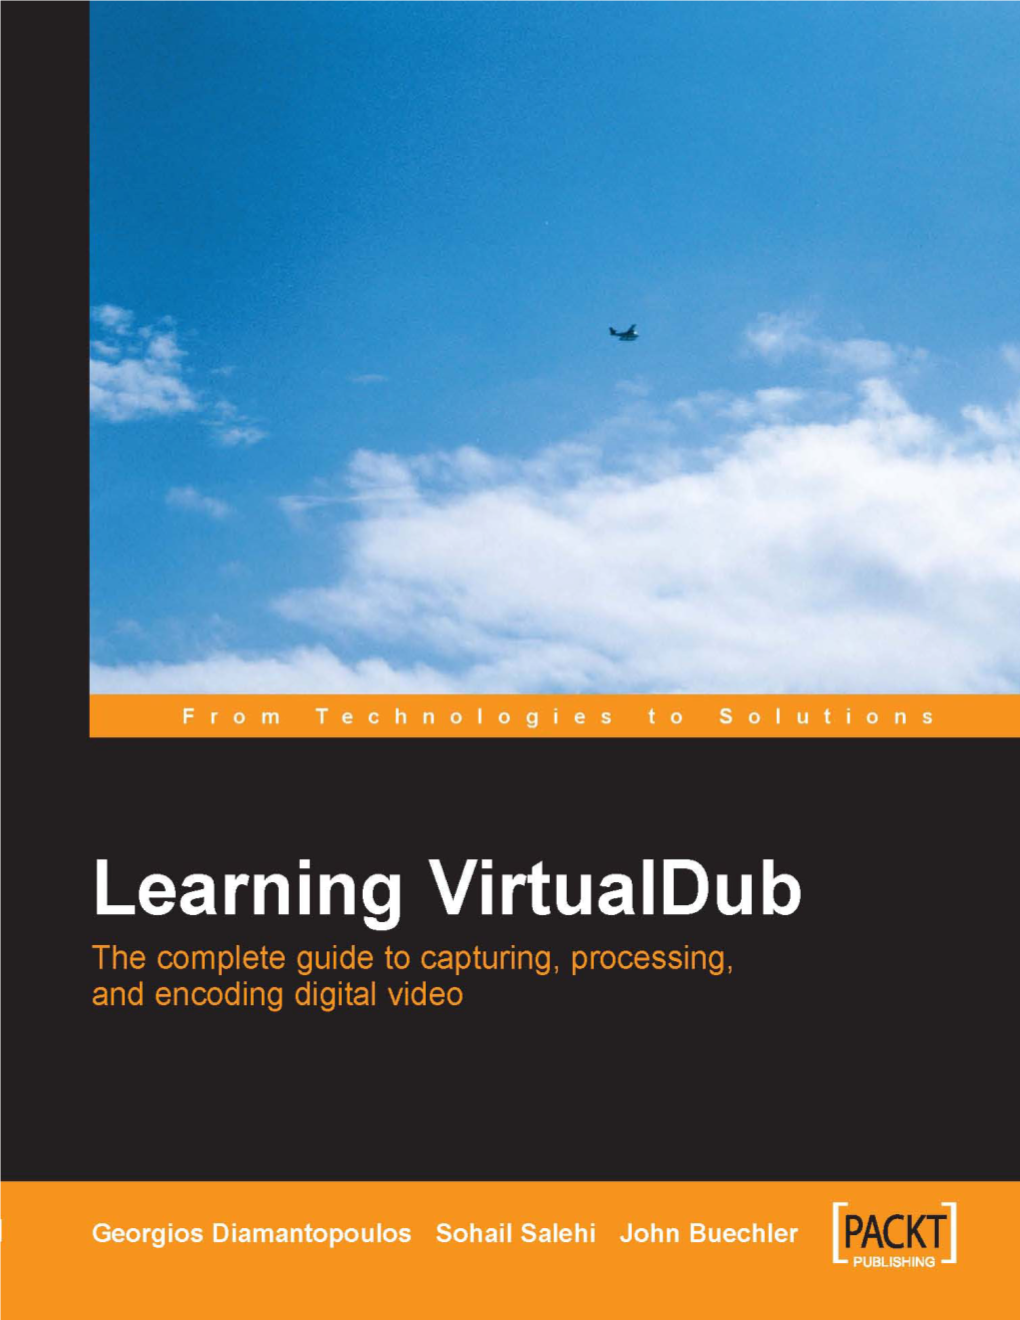 Learning Virtualdub the Complete Guide to Capturing, Processing, and Encoding Digital Video